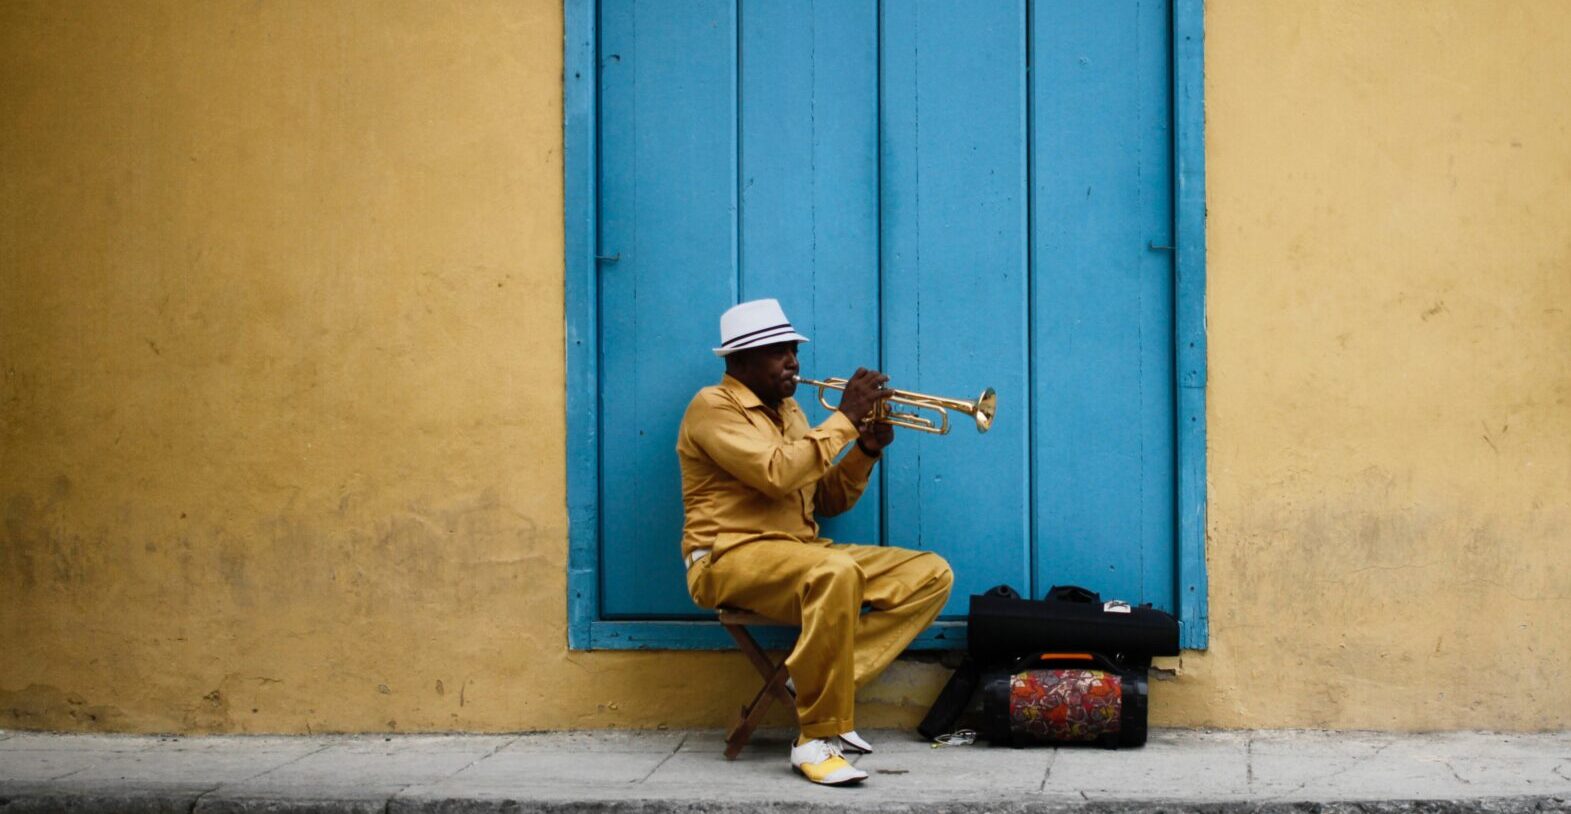 A man is sitting on a stool in front of a blue door playing a trumpet.